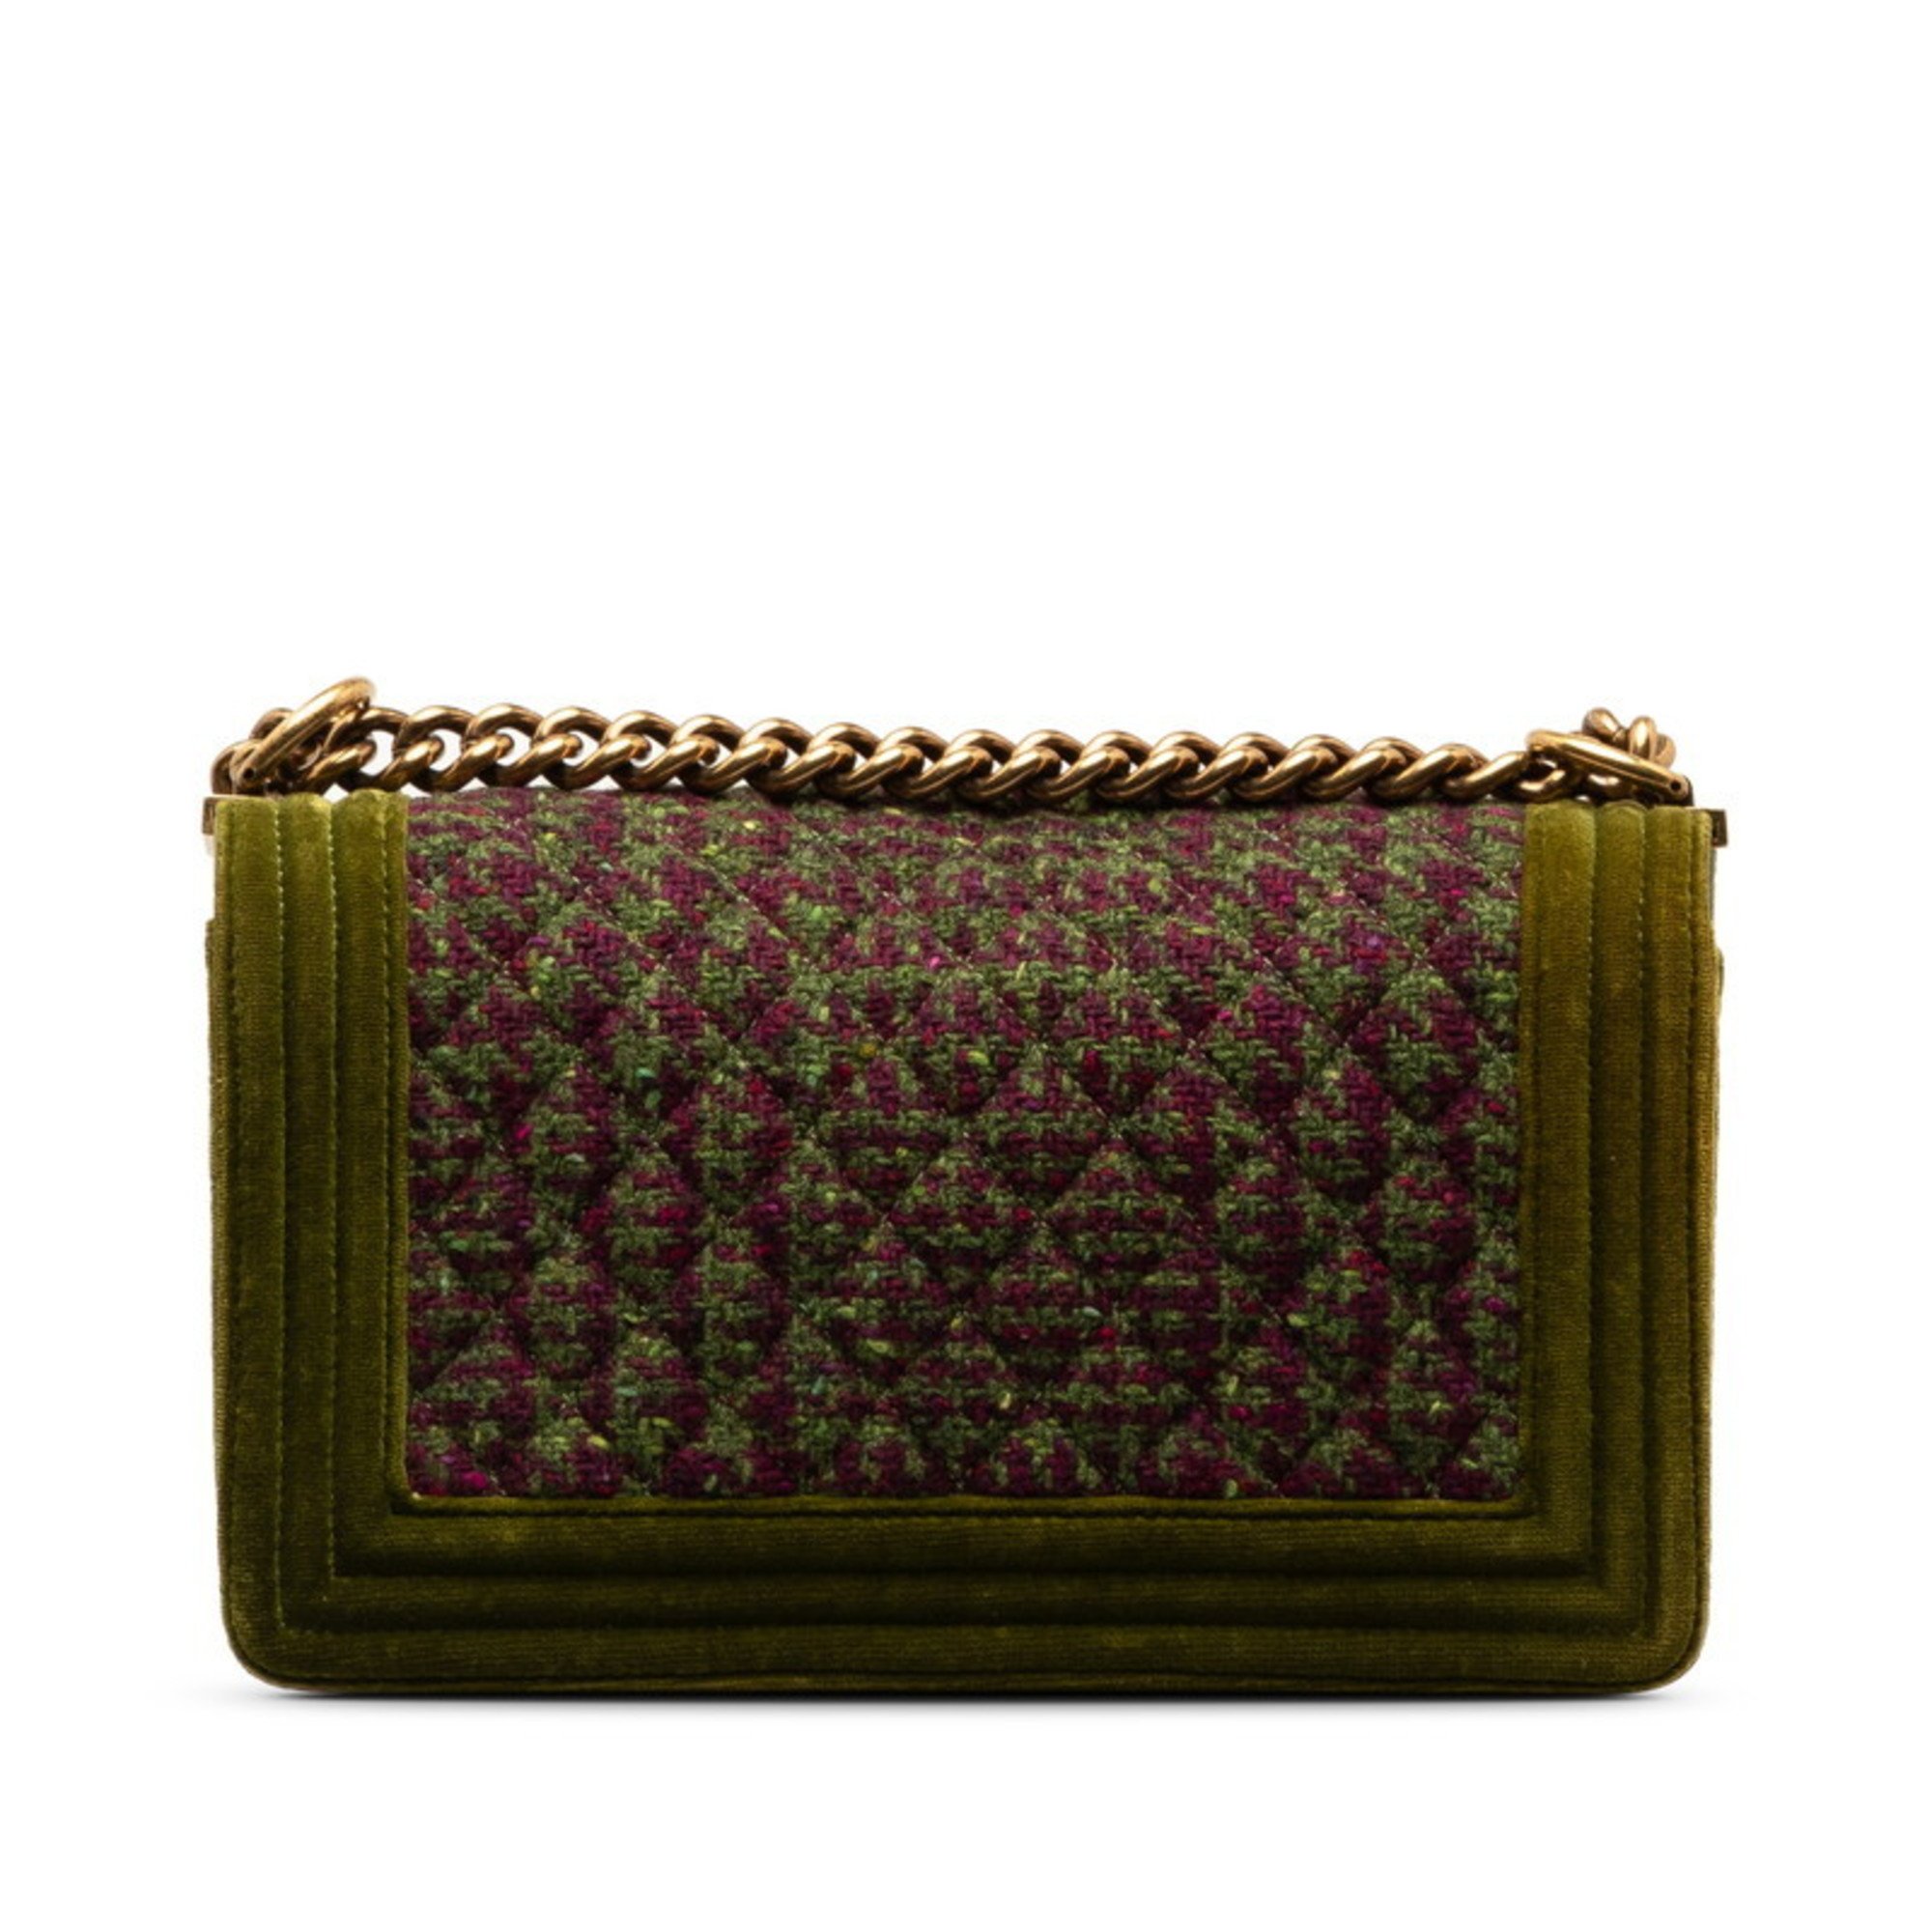 Chanel Matelasse Boy Coco Mark Chain Shoulder Bag Green Multicolor Tweed Leather Women's CHANEL